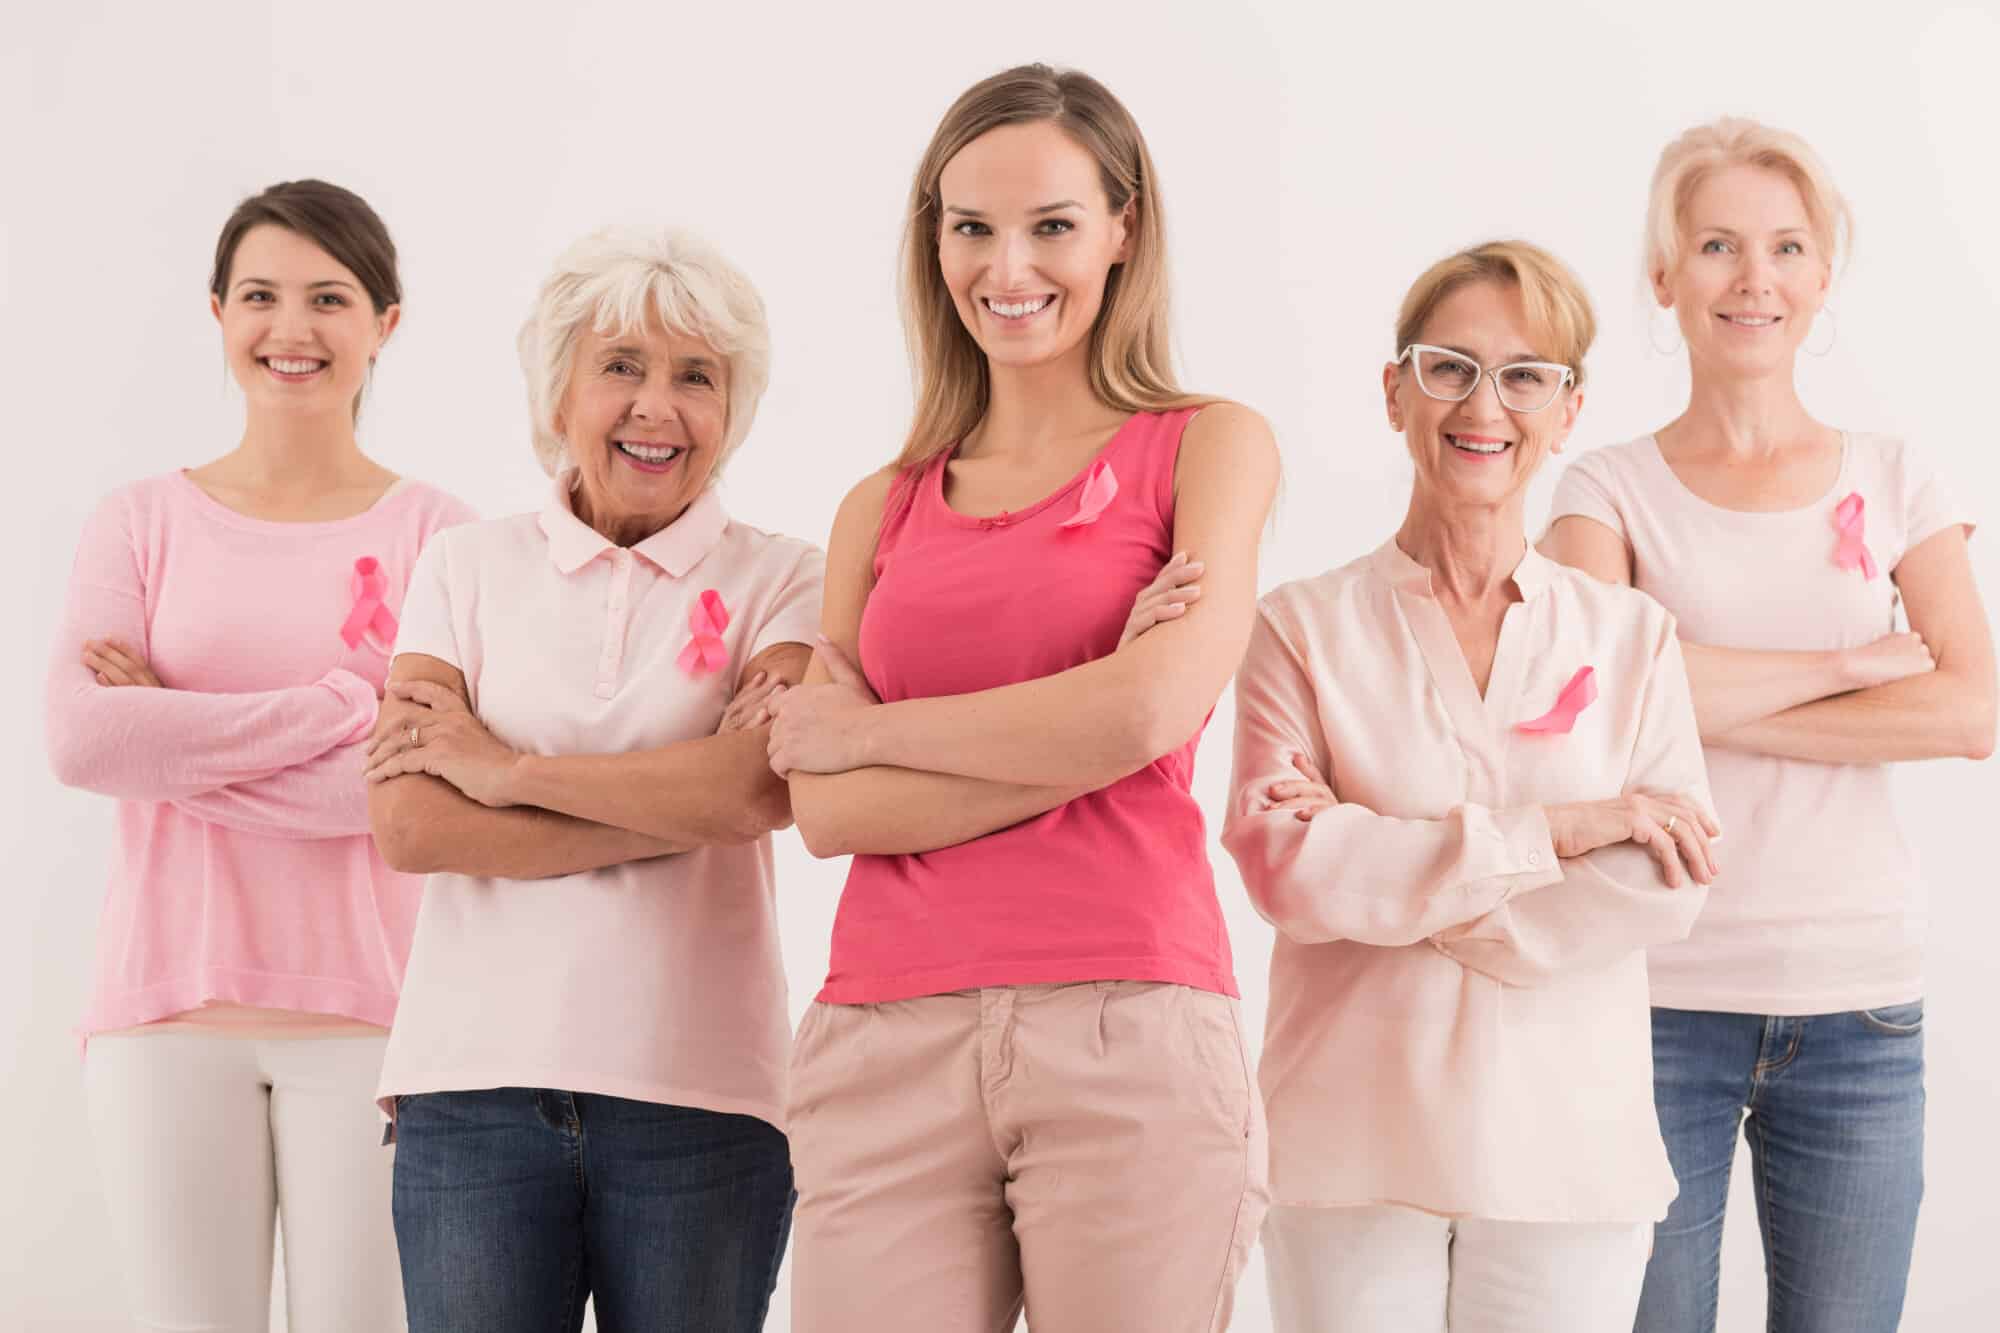 Group of Smiling Confident Women Wearing Pink